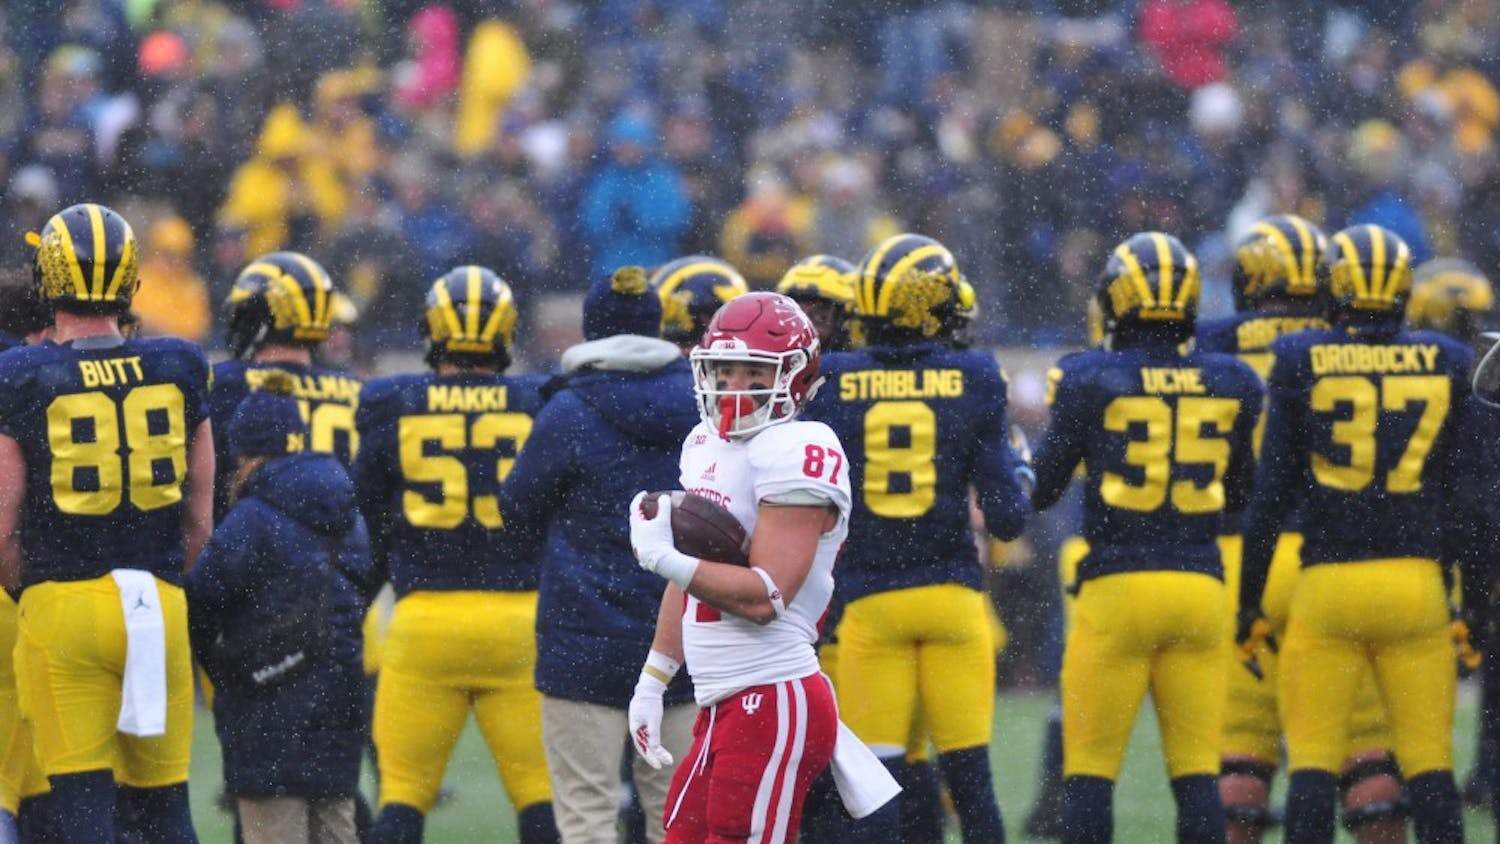 Senior wide receiver Mitchell Paige on the field at Michigan Stadium during pre-game warm ups on Saturday. IU lost 20-10.